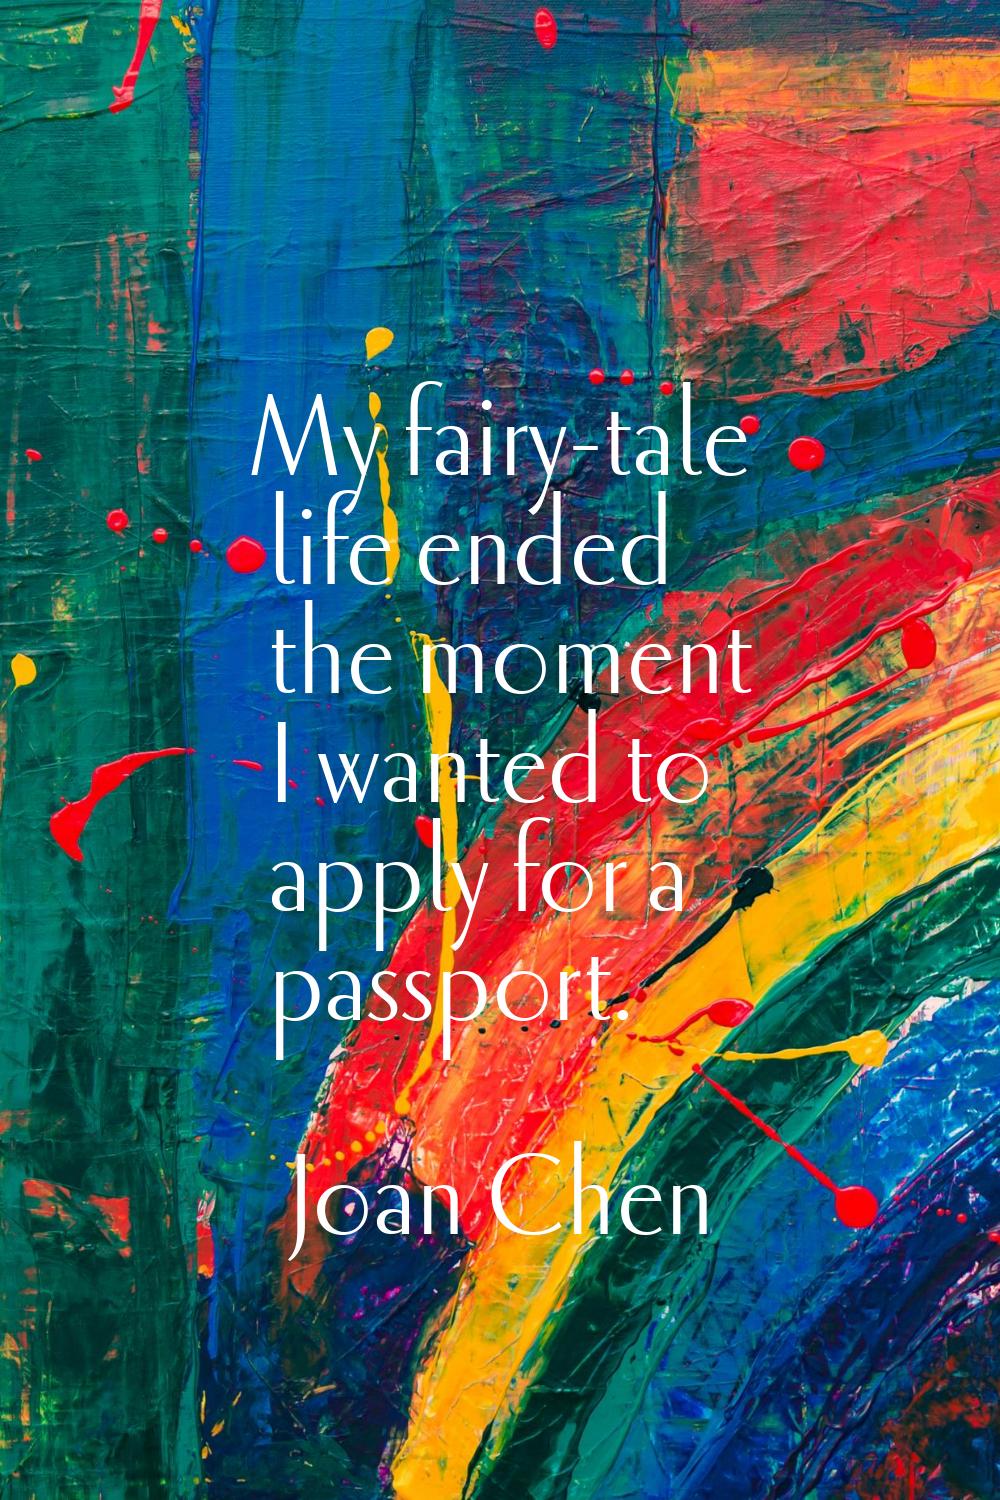 My fairy-tale life ended the moment I wanted to apply for a passport.